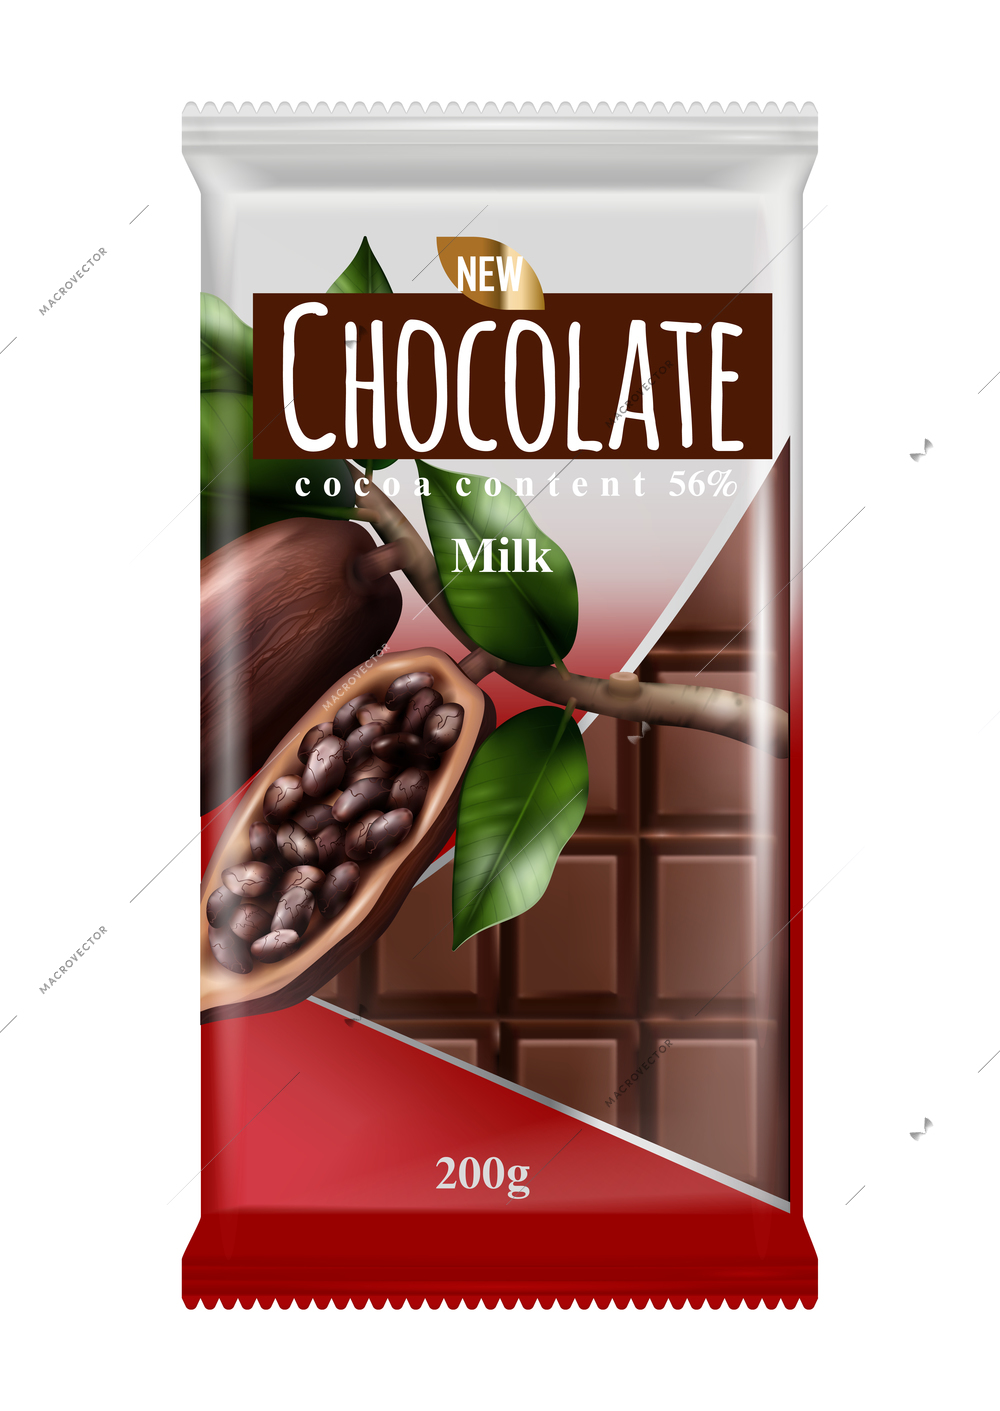 Chocolate advertising realistic composition with isolated image of branded choco bar vector illustration